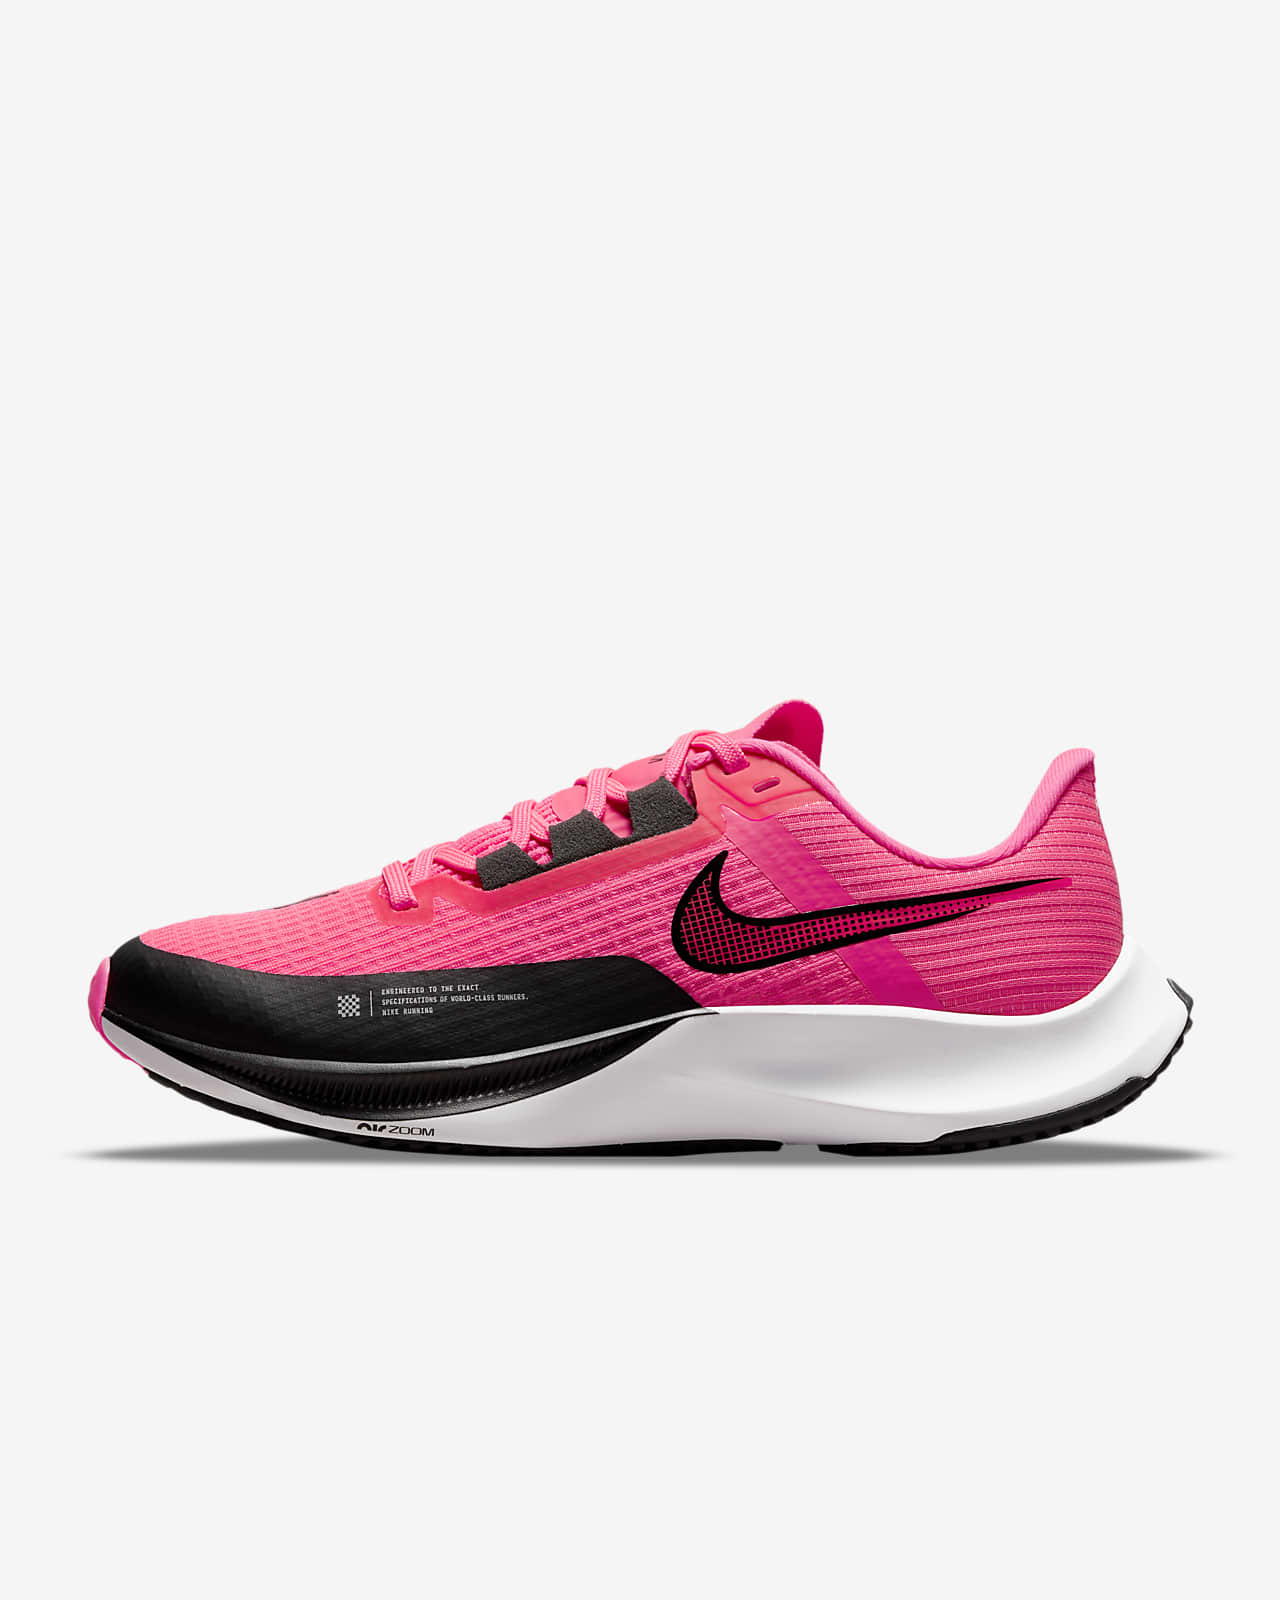 Nike Air Zoom Rival Fly 3 Women's Road Racing Shoes